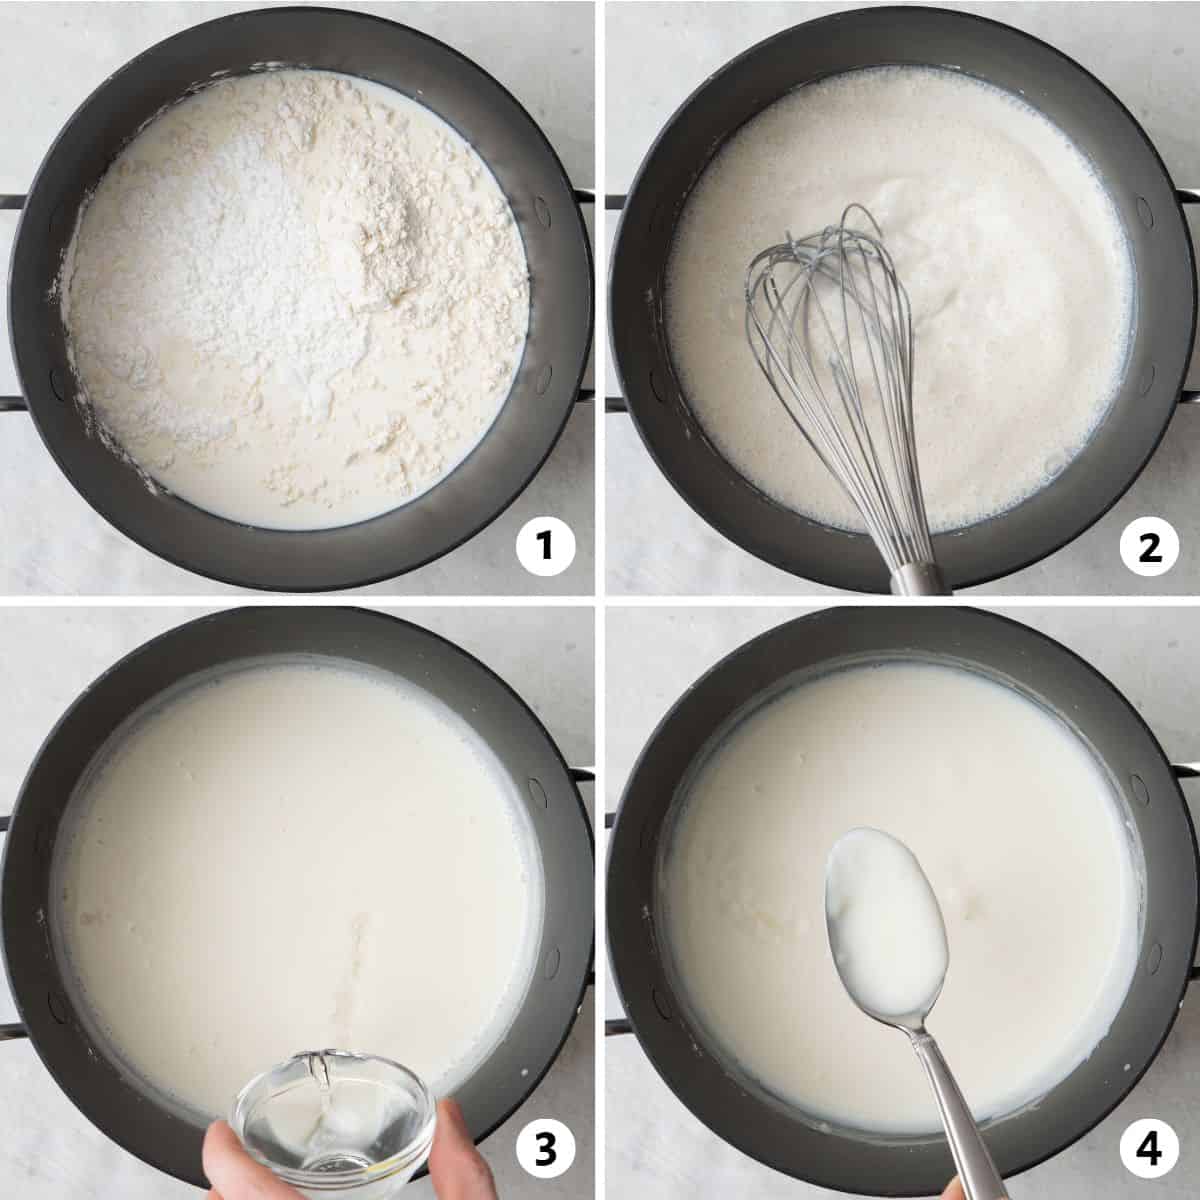 4 image collage making recipe: 1- milk, flour, cornstarch, and sugar in a saucepan, 2- whisking to combine, 3- adding orange blossom water, 4- cream after cooled with a spoon lifting some up.